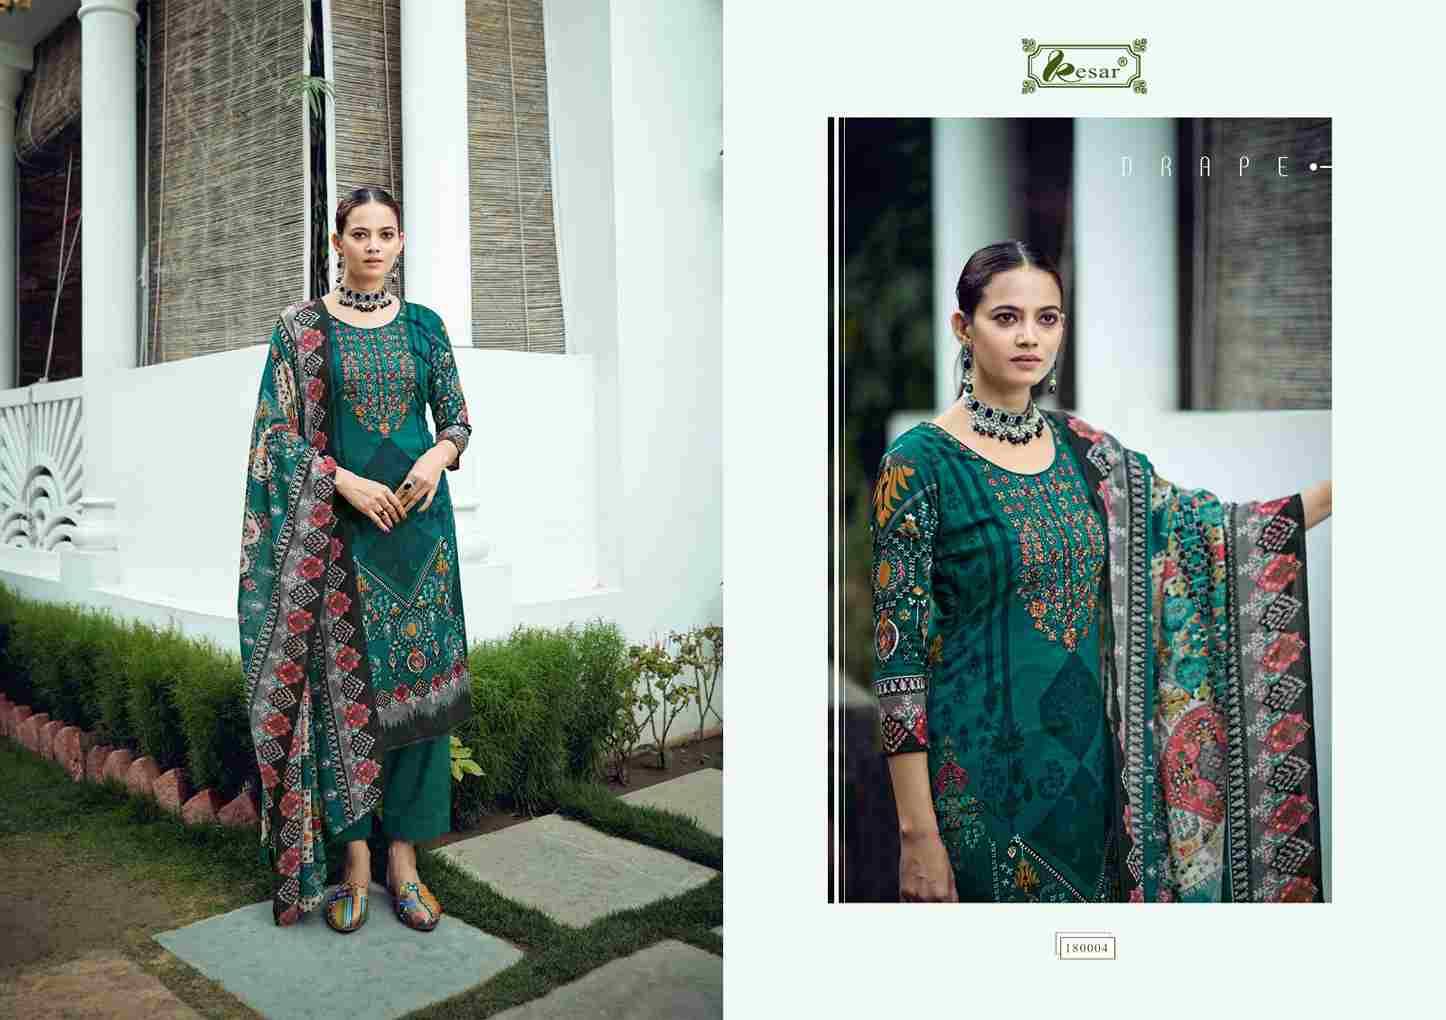 Selena By Kesar 180001 To 180006 Series Beautiful Festive Suits Stylish Fancy Colorful Party Wear & Occasional Wear Pure Lawn Cotton Dresses At Wholesale Price